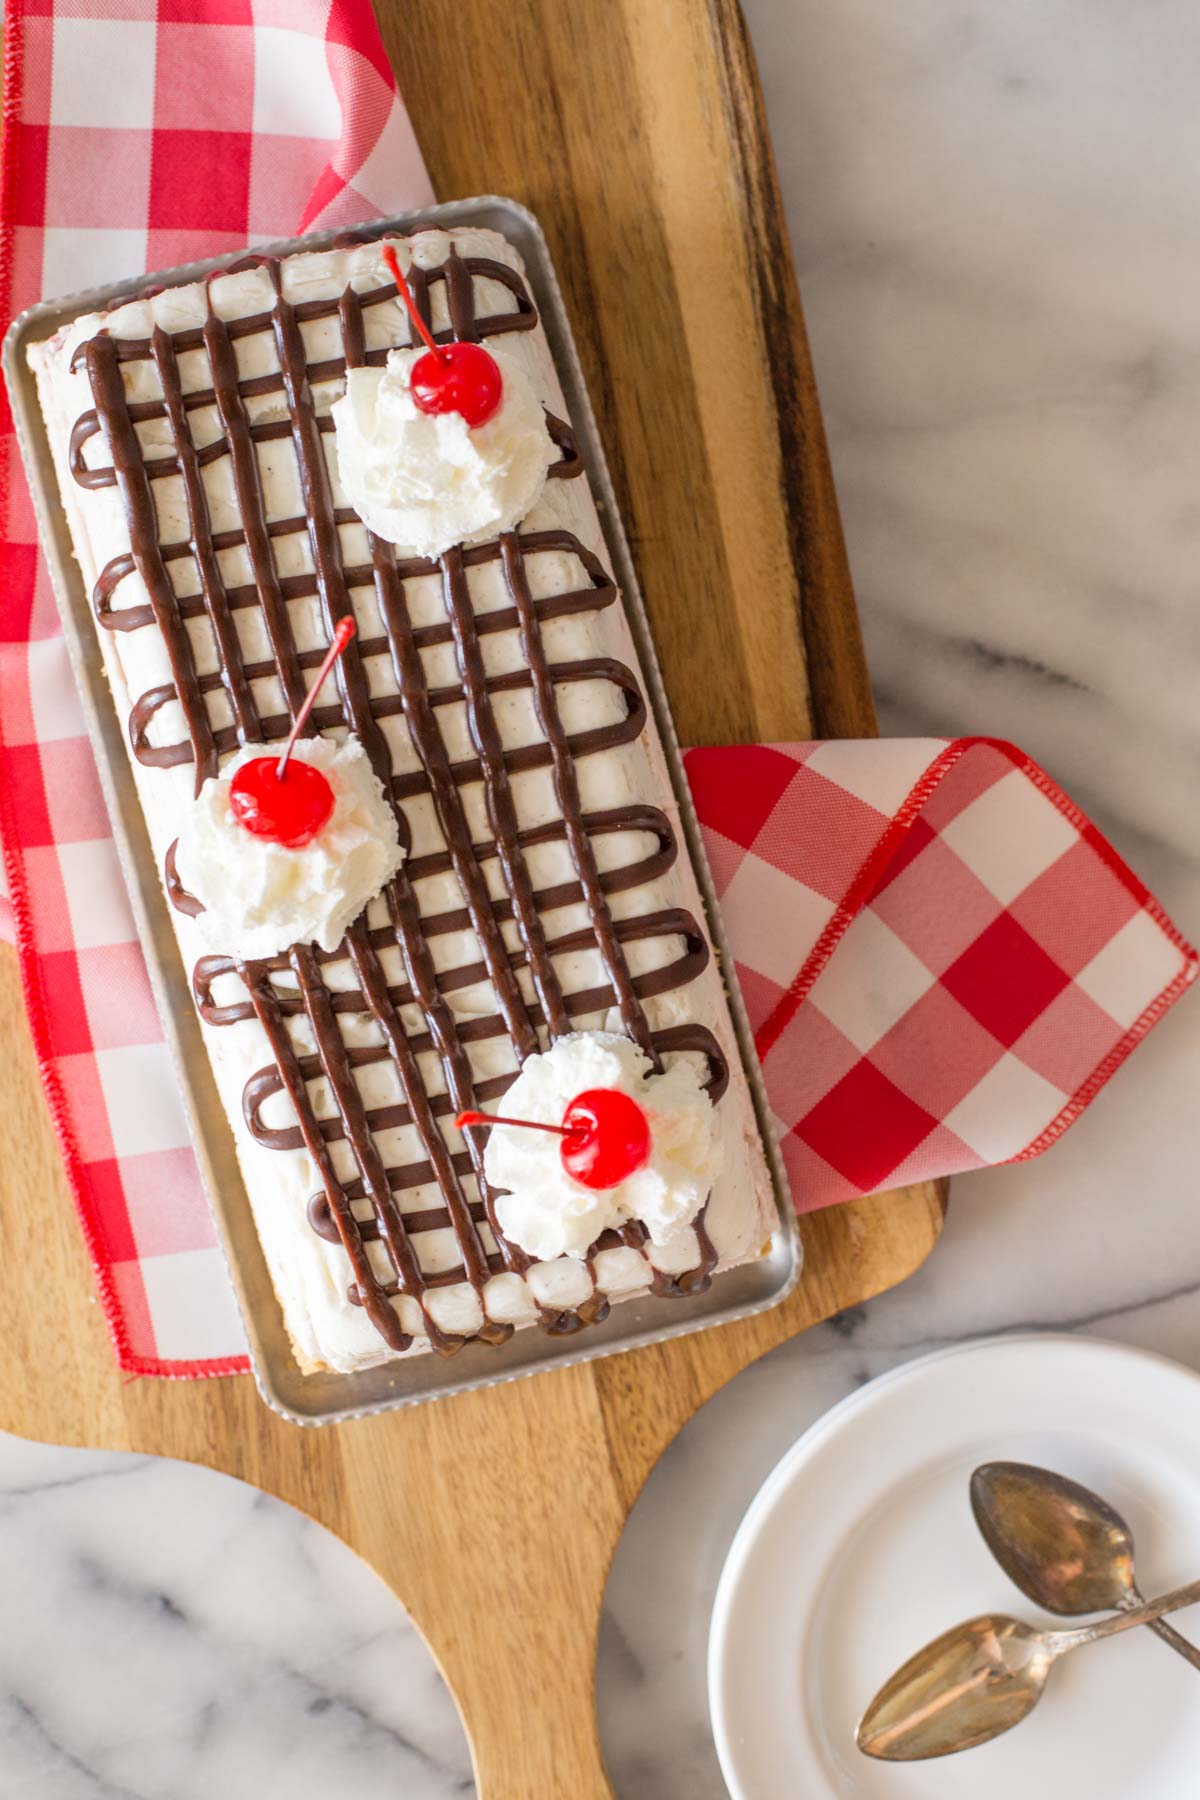 Overhead shot of Banana Split Ice Cream Cake on a serving tray sitting on a red and white checkered cloth on a wooden cutting board.  